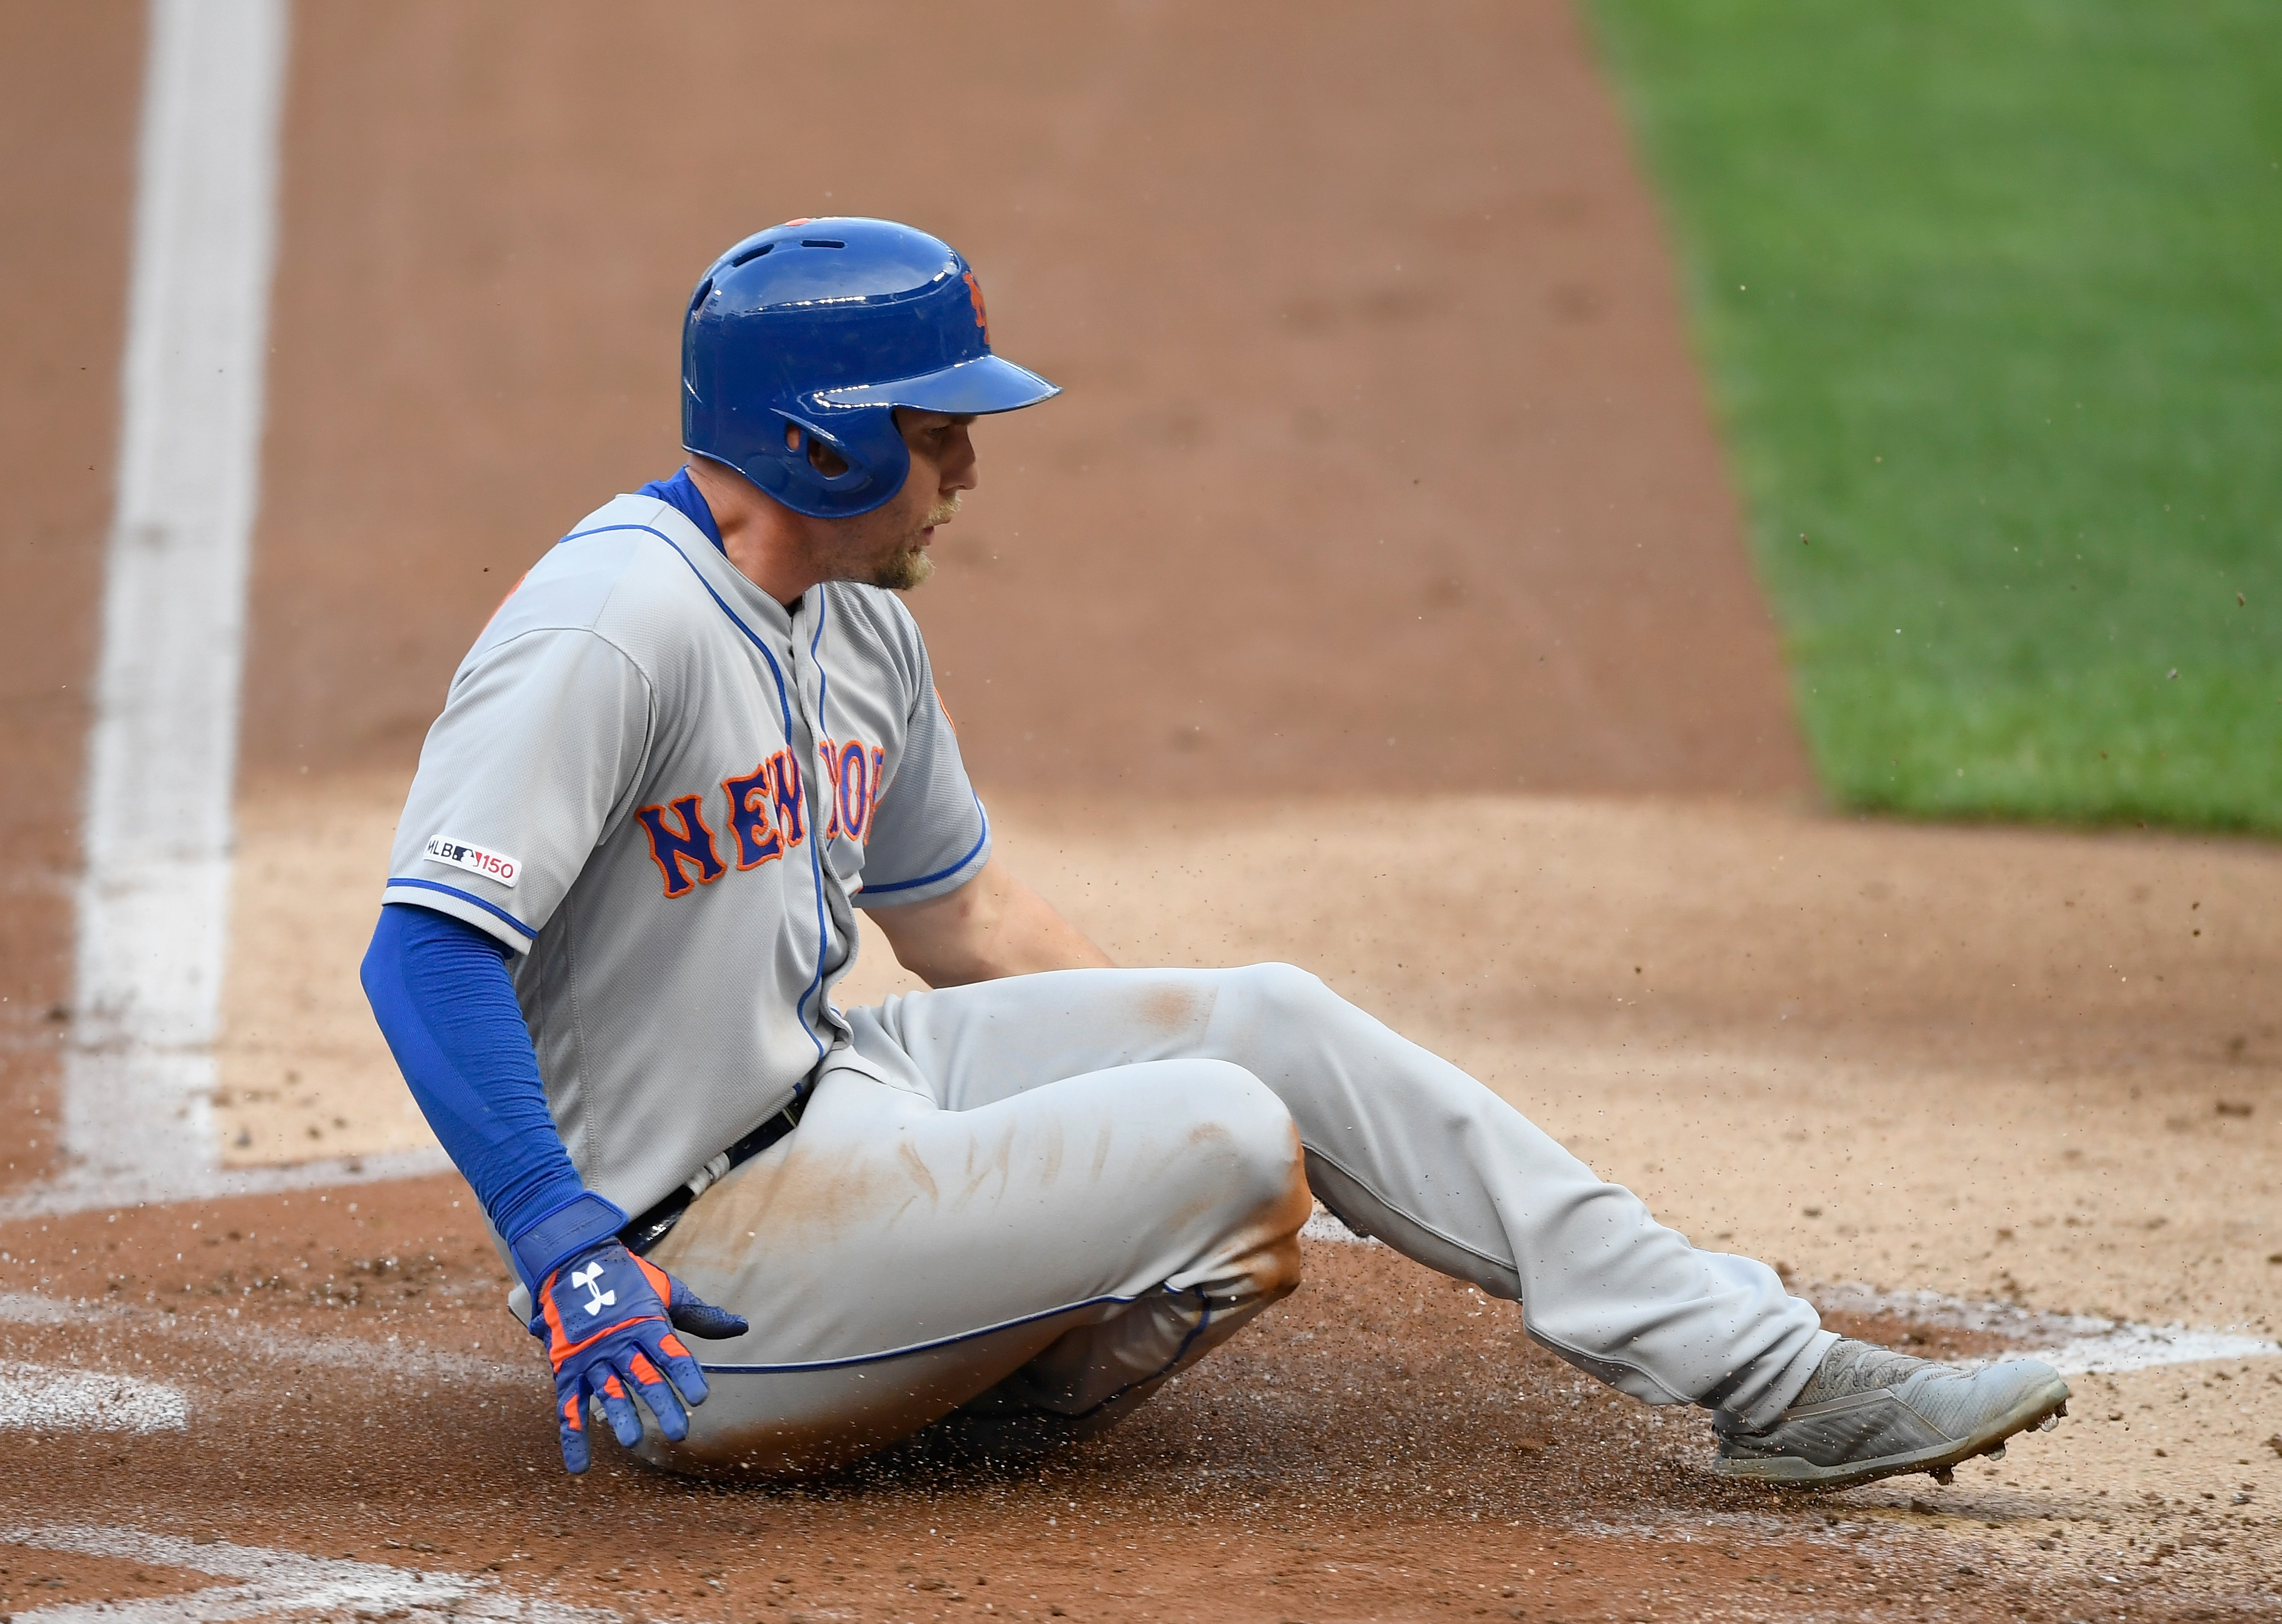 NY Mets: Jeff McNeil is among MLB's most surprising stars